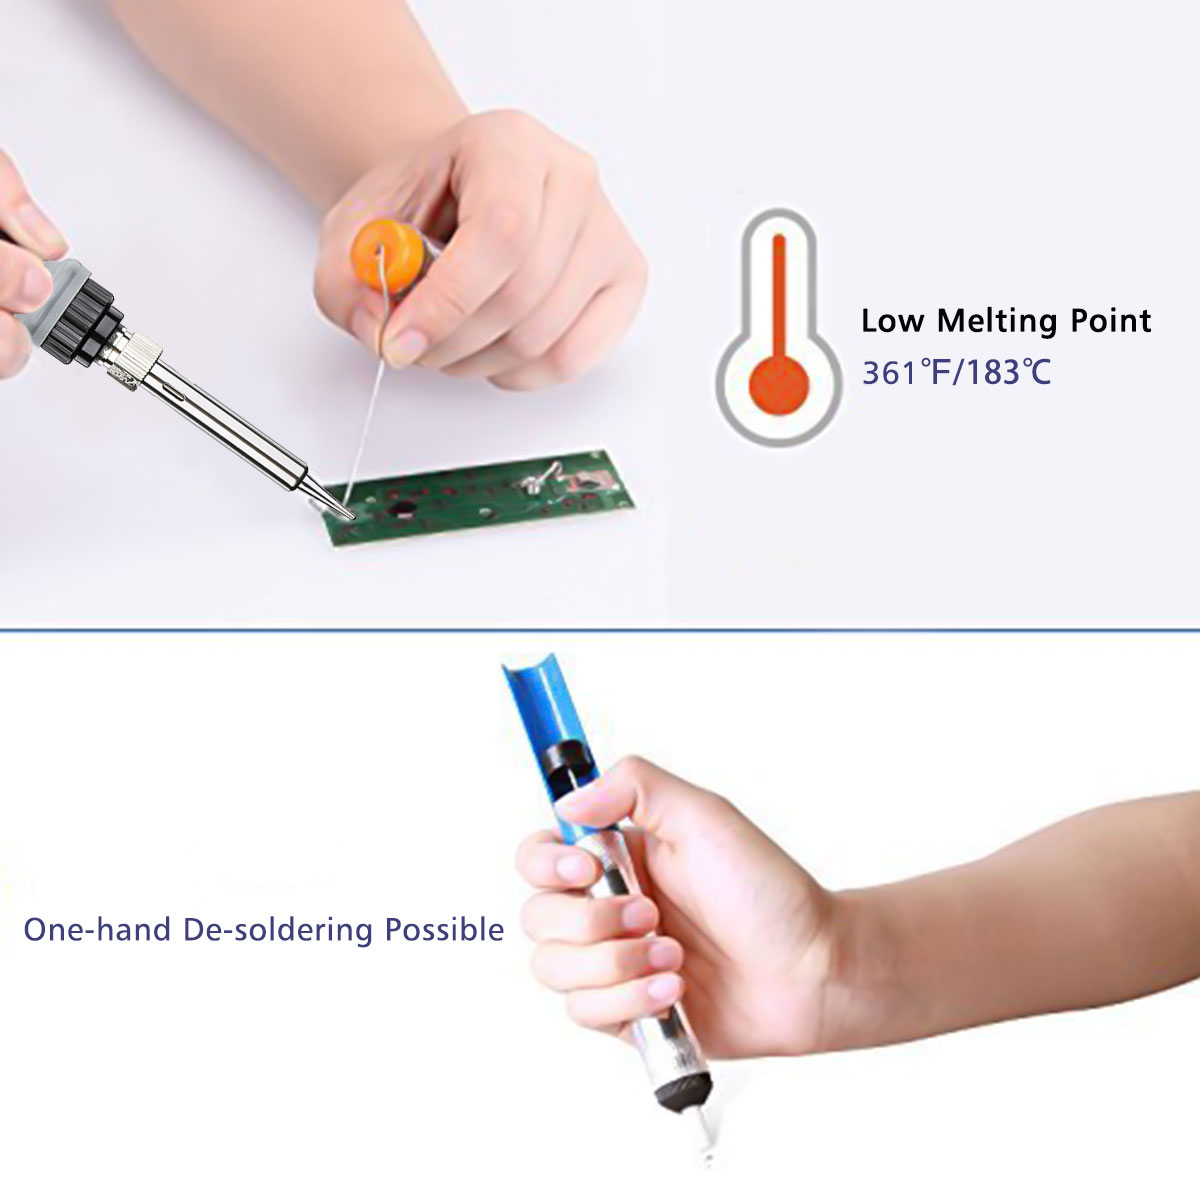 60W-Soldering-Iron-Kit-Tips-Electronic-Welding-Tool-Adjustable-Temperature-Case-1407153-6